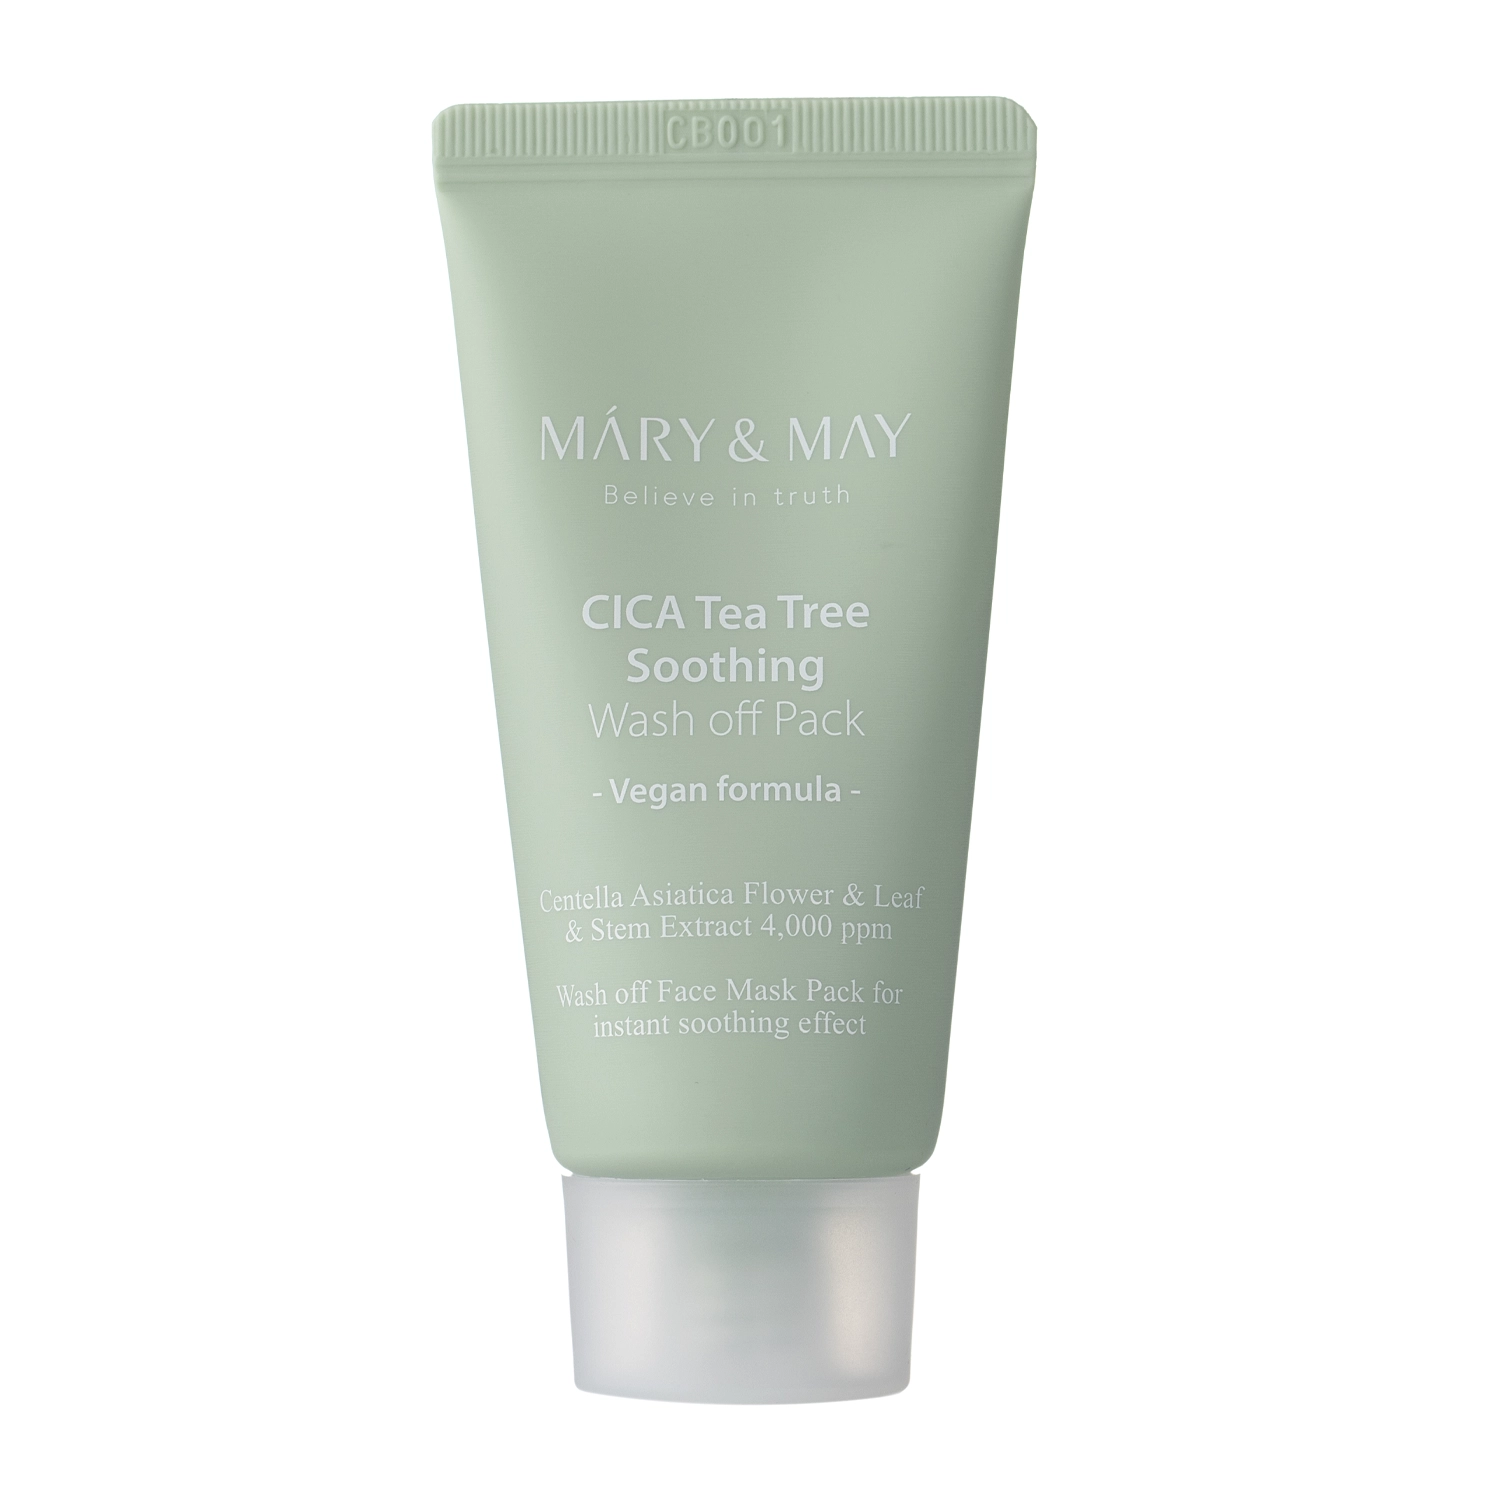 Mary&May - Vegan CICA TeaTree Soothing Wash off Pack - Agyagmaszk - 30g